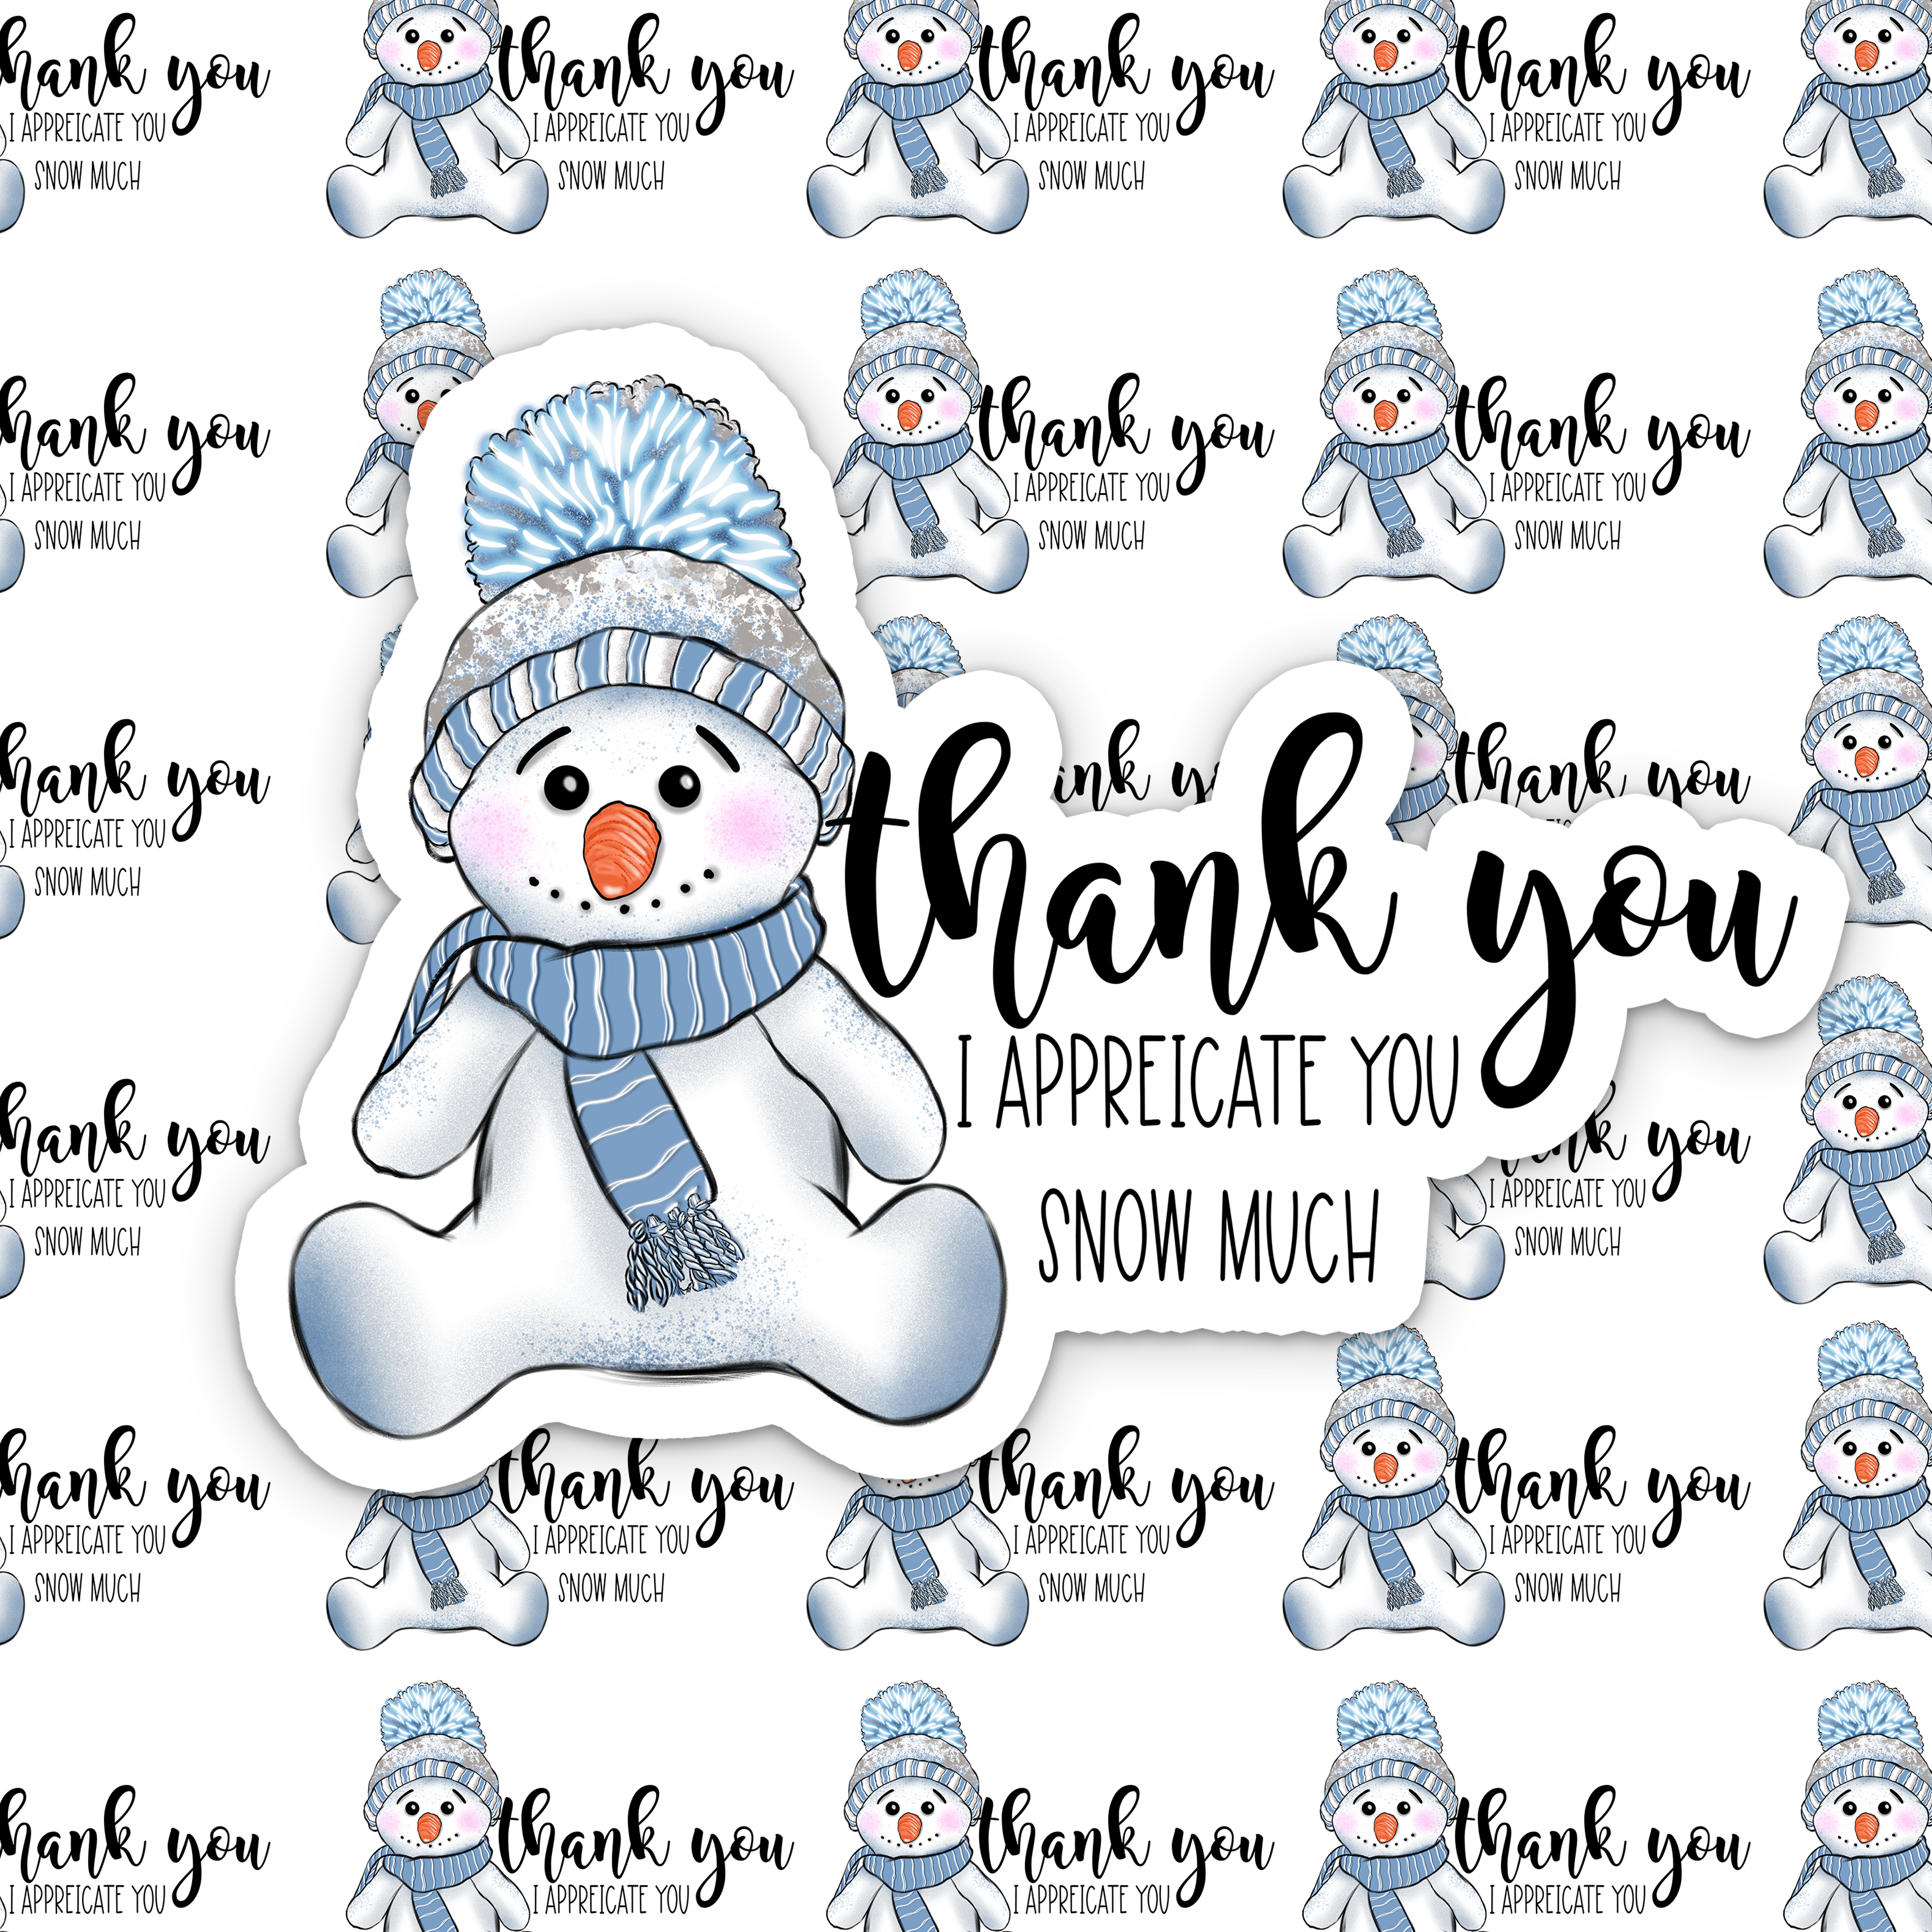 Thank You Appreciate You Snow Much | Packaging Stickers | Business Branding  | Small Shop Stickers | Sticker #: S0530 | Ready To Ship